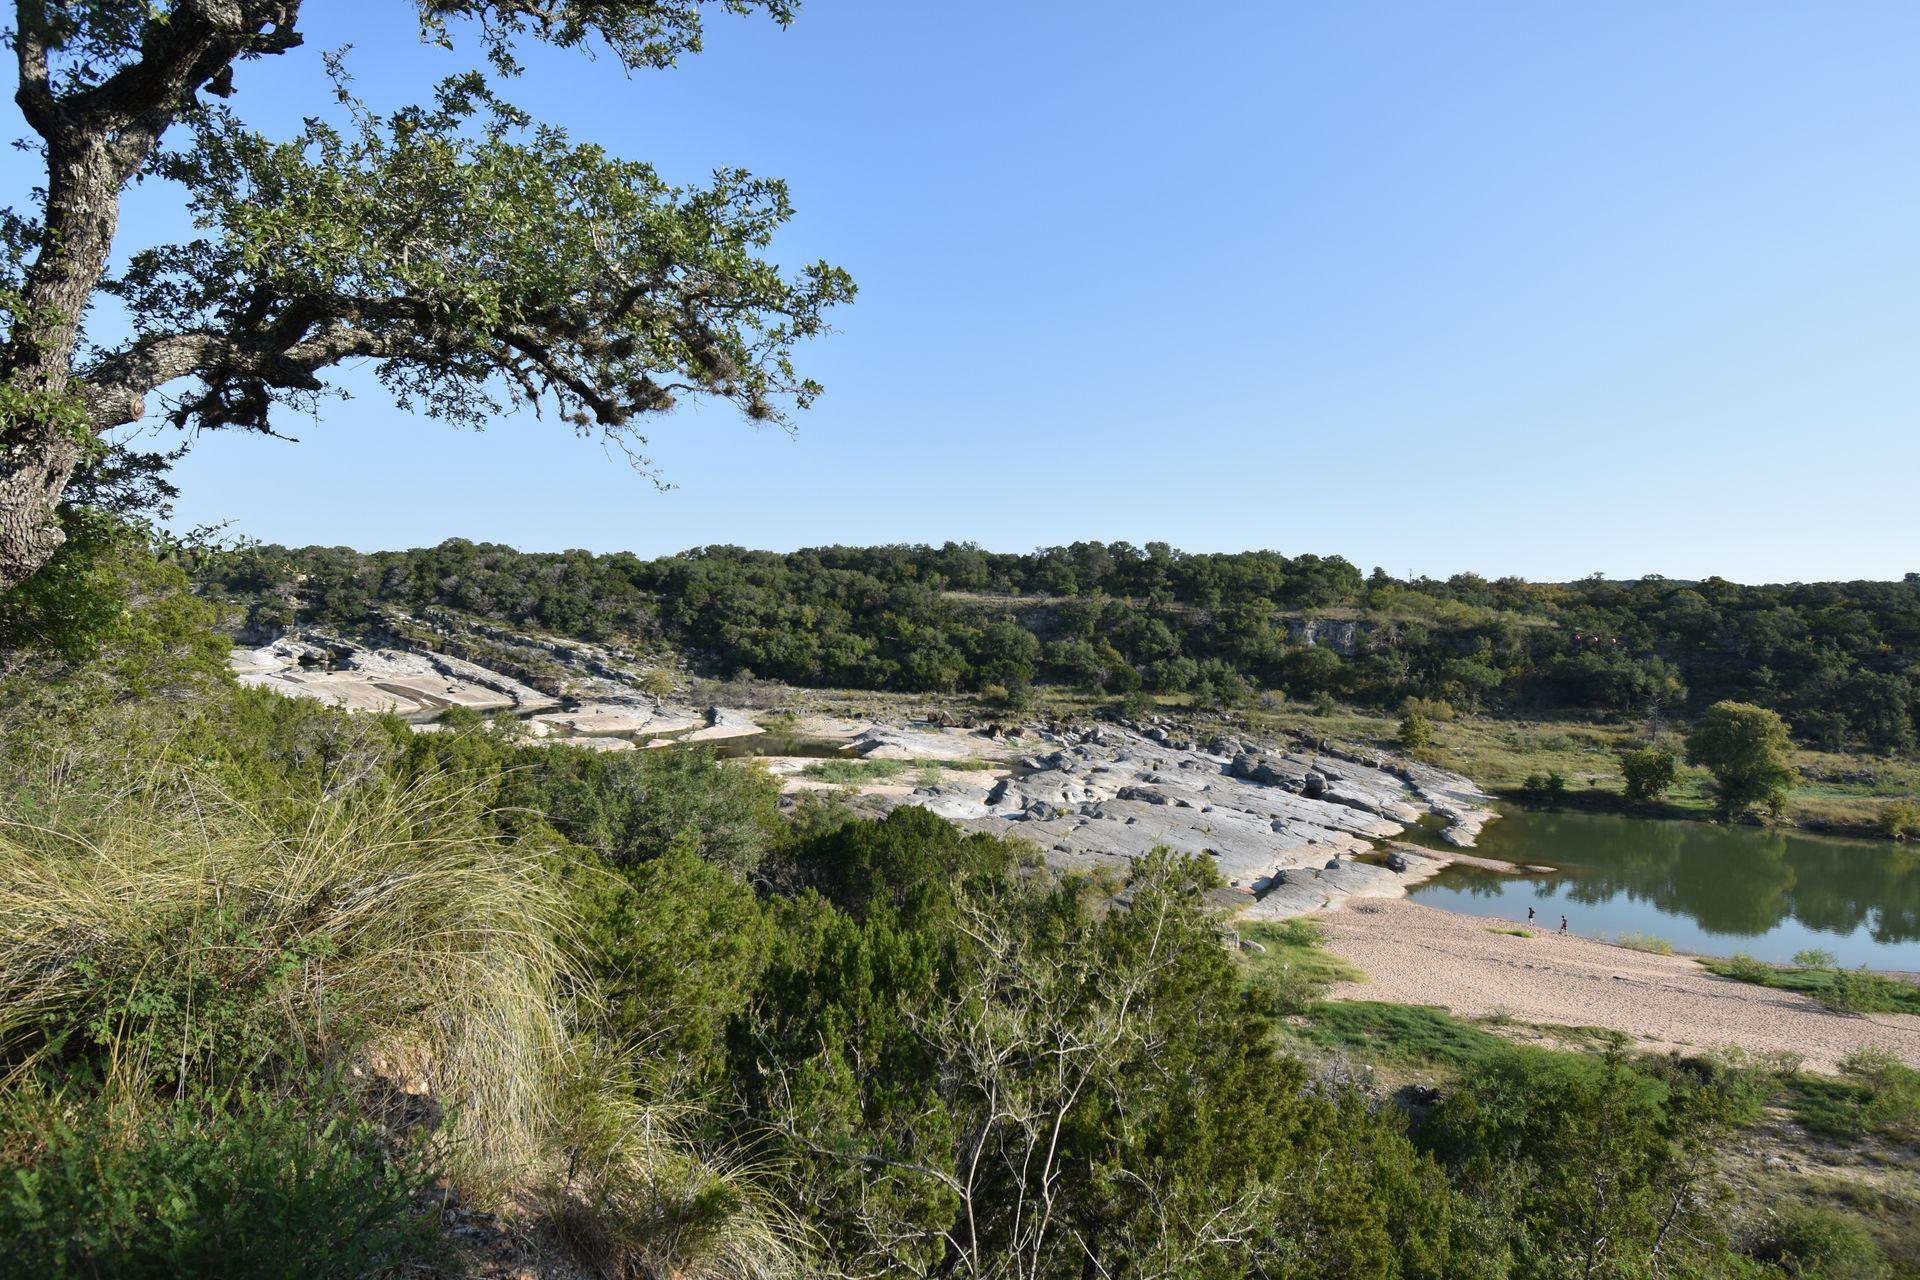 A view looking down on Pedernales Falls